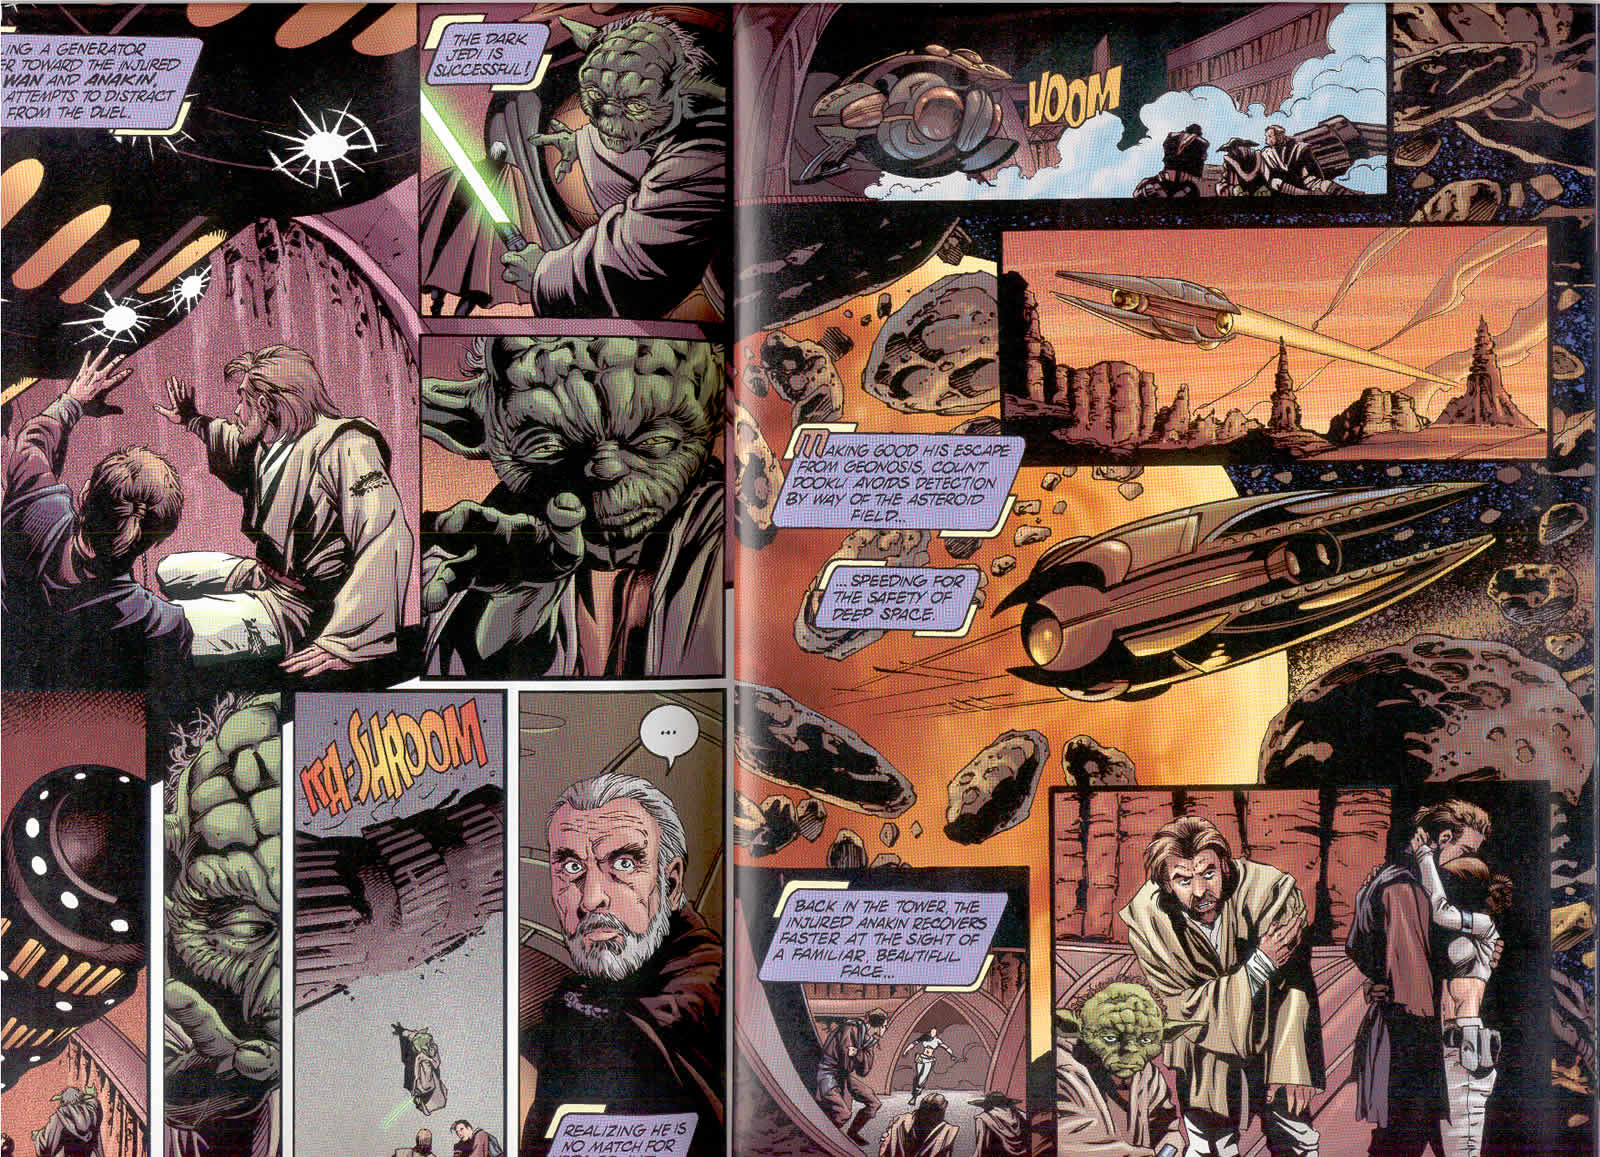 Second part of Yoda vs. Dooku from Attack of the Clones comic book